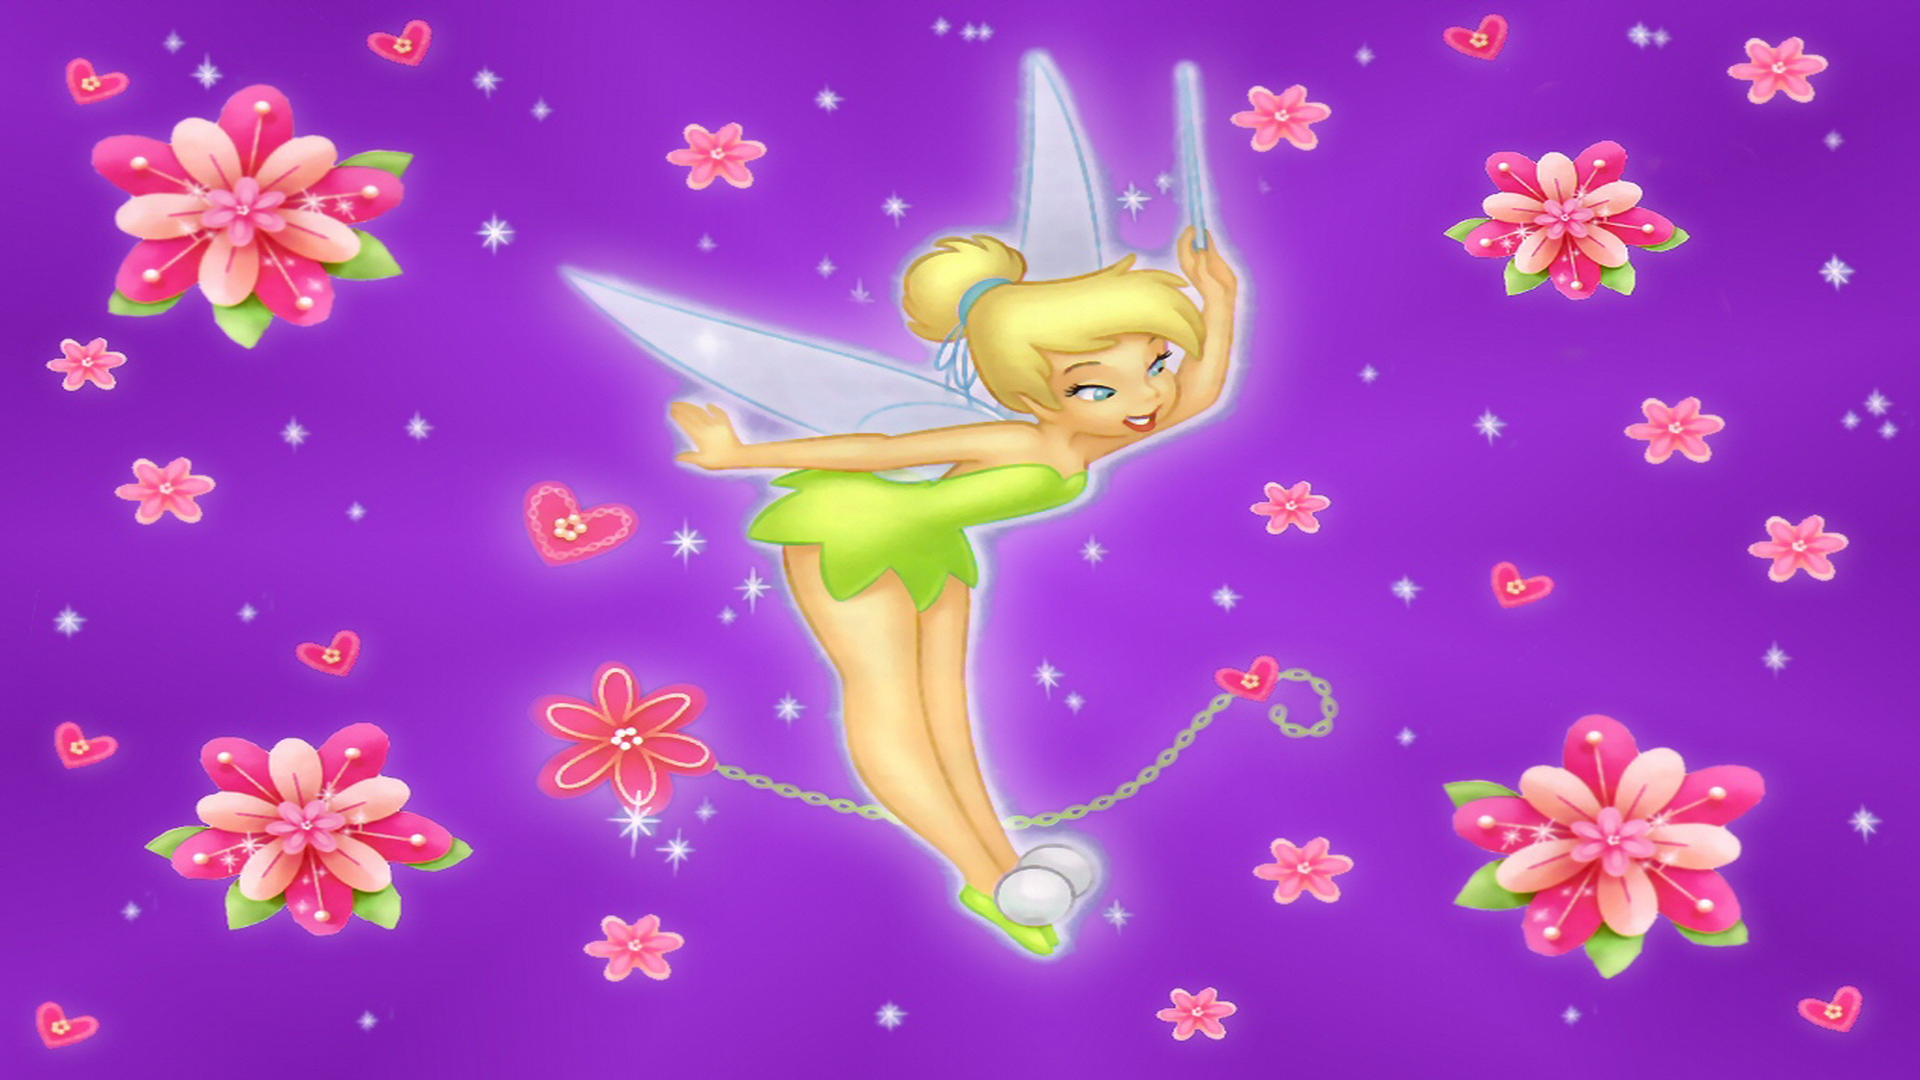 Tinkerbell Wallpaper For Puters Puter